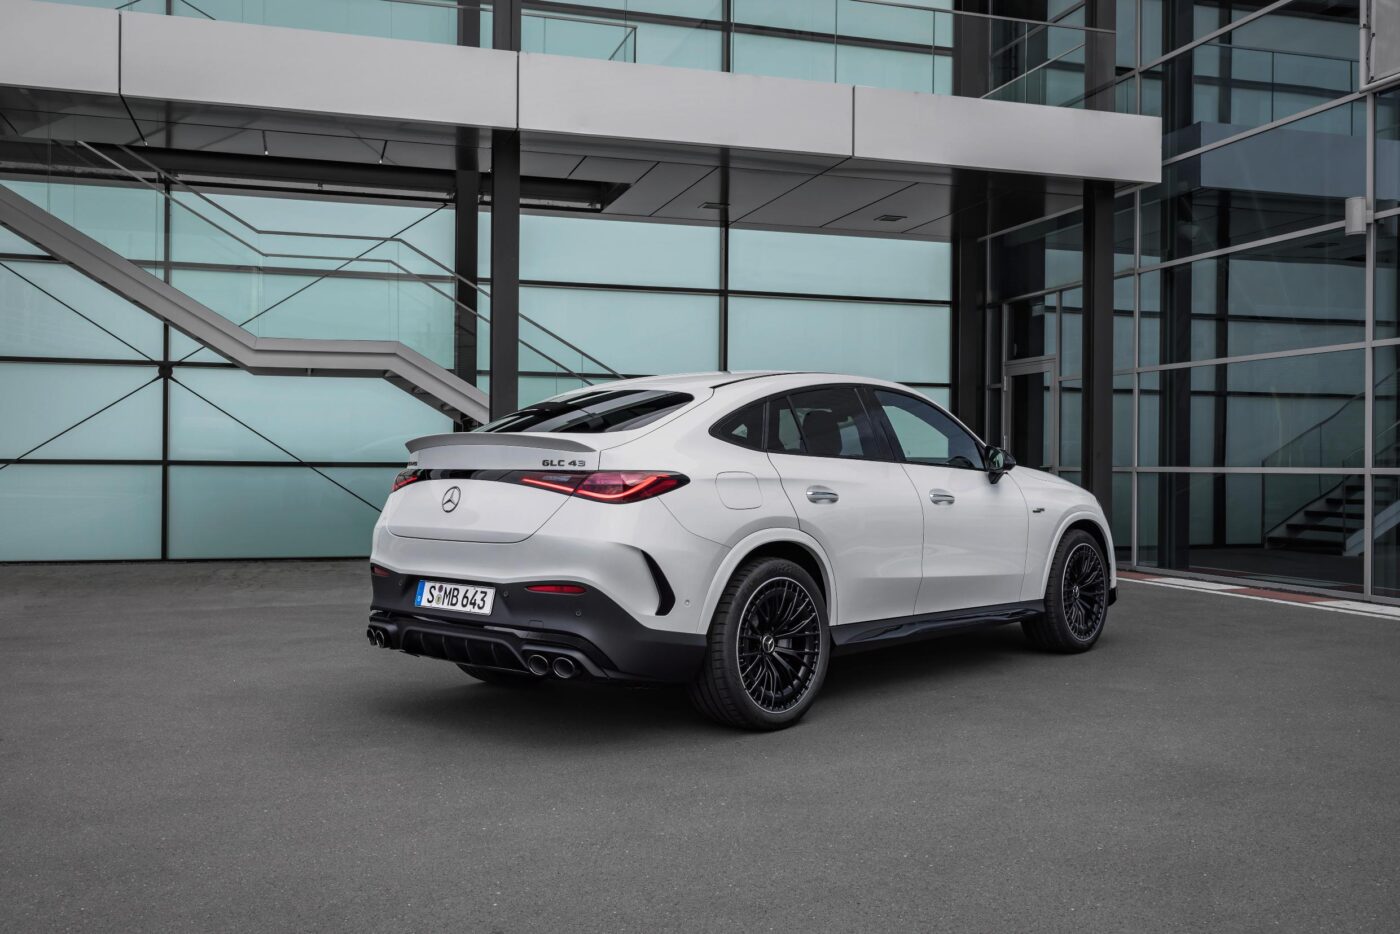 2025 Mercedes-AMG GLC Coupe: Hand-Built M139l Engine, Rear Axle